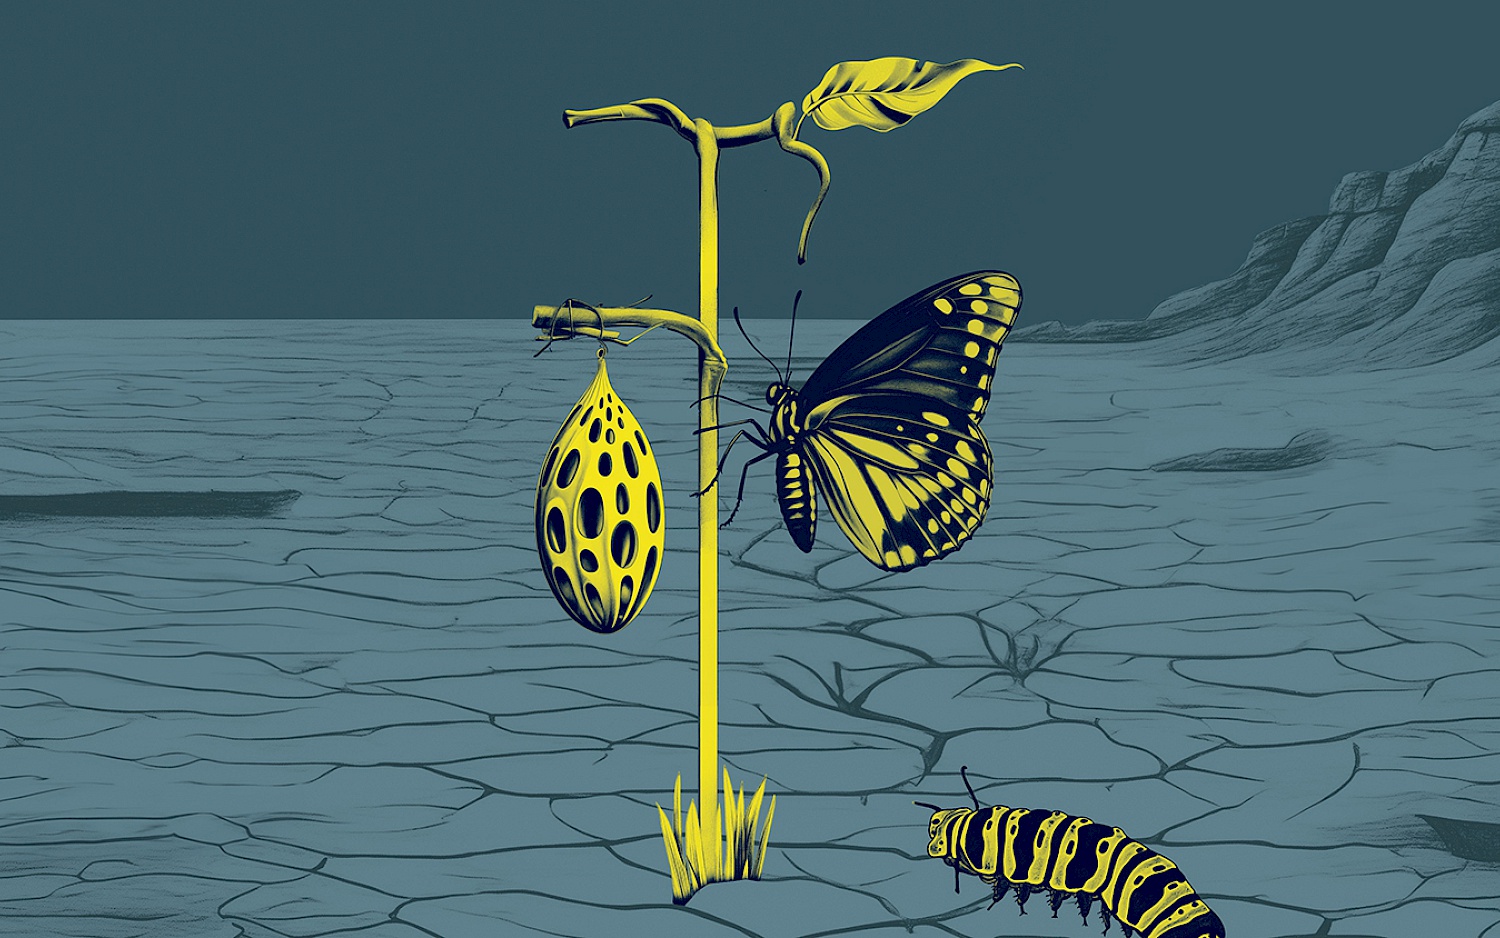 Graphic in gray and yellow, barren landscape with butterfly and caterpillar.